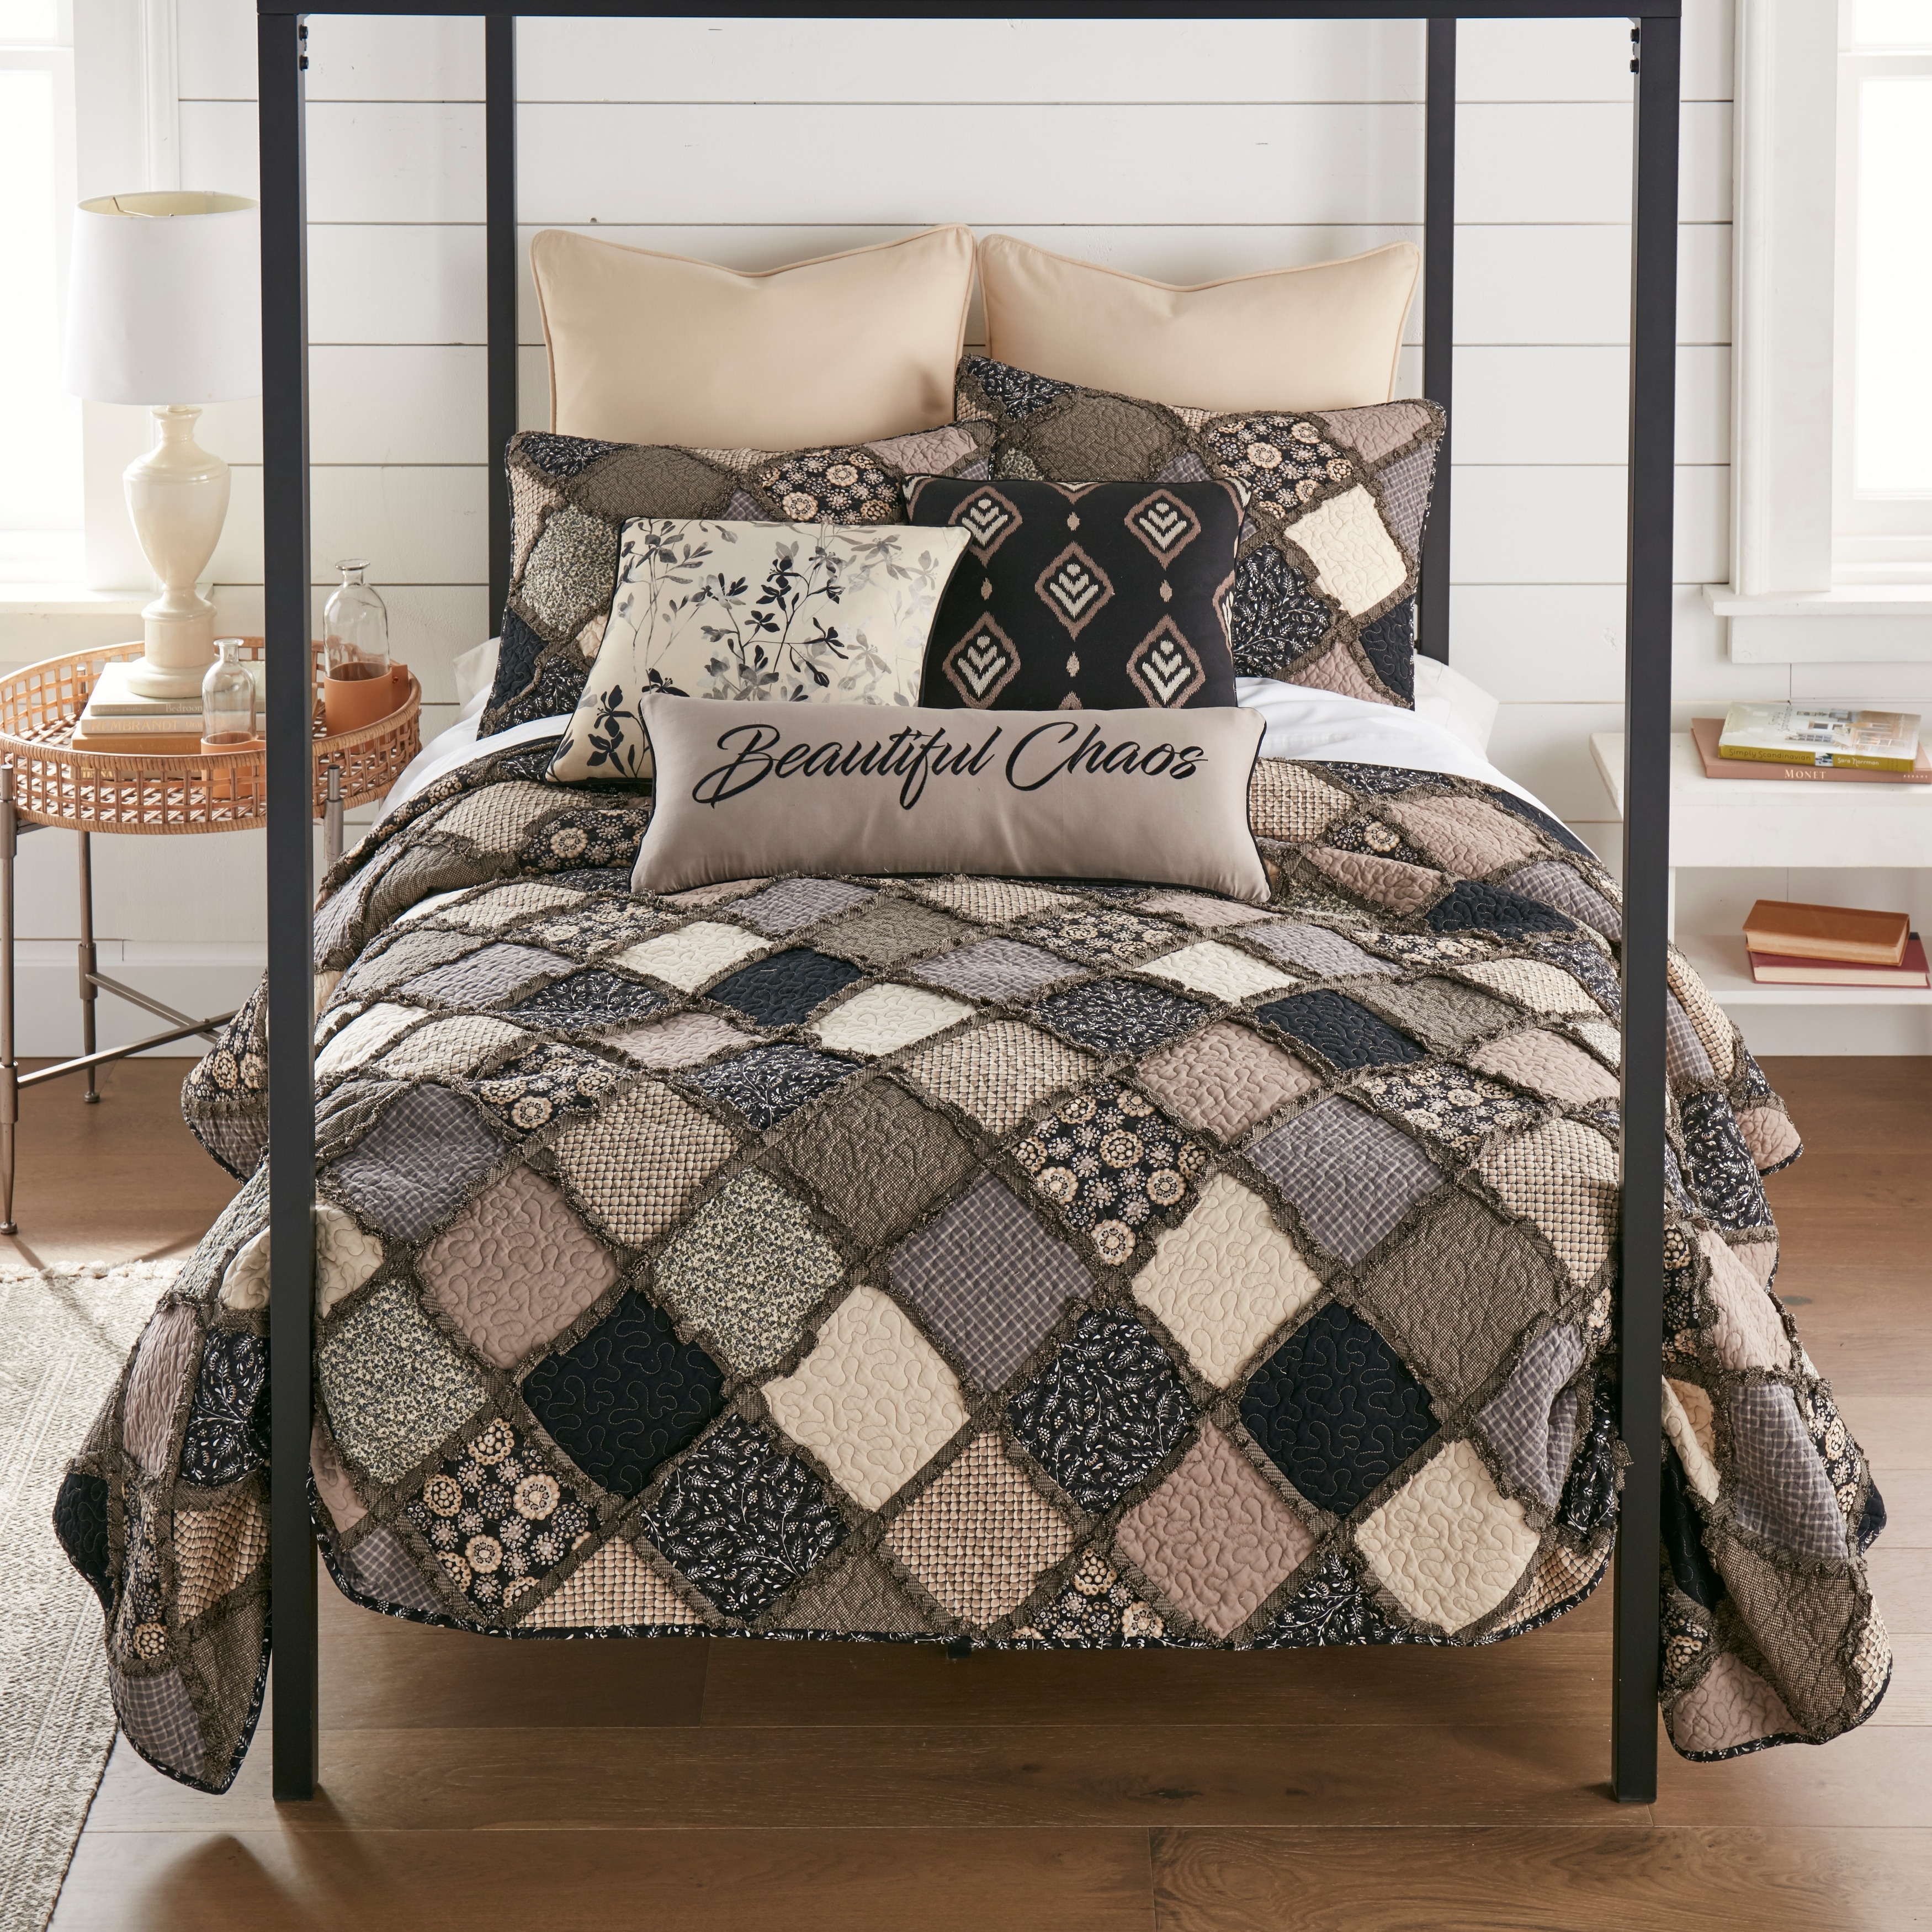 Patchwork Quilts and Bedspreads - Bed Bath & Beyond